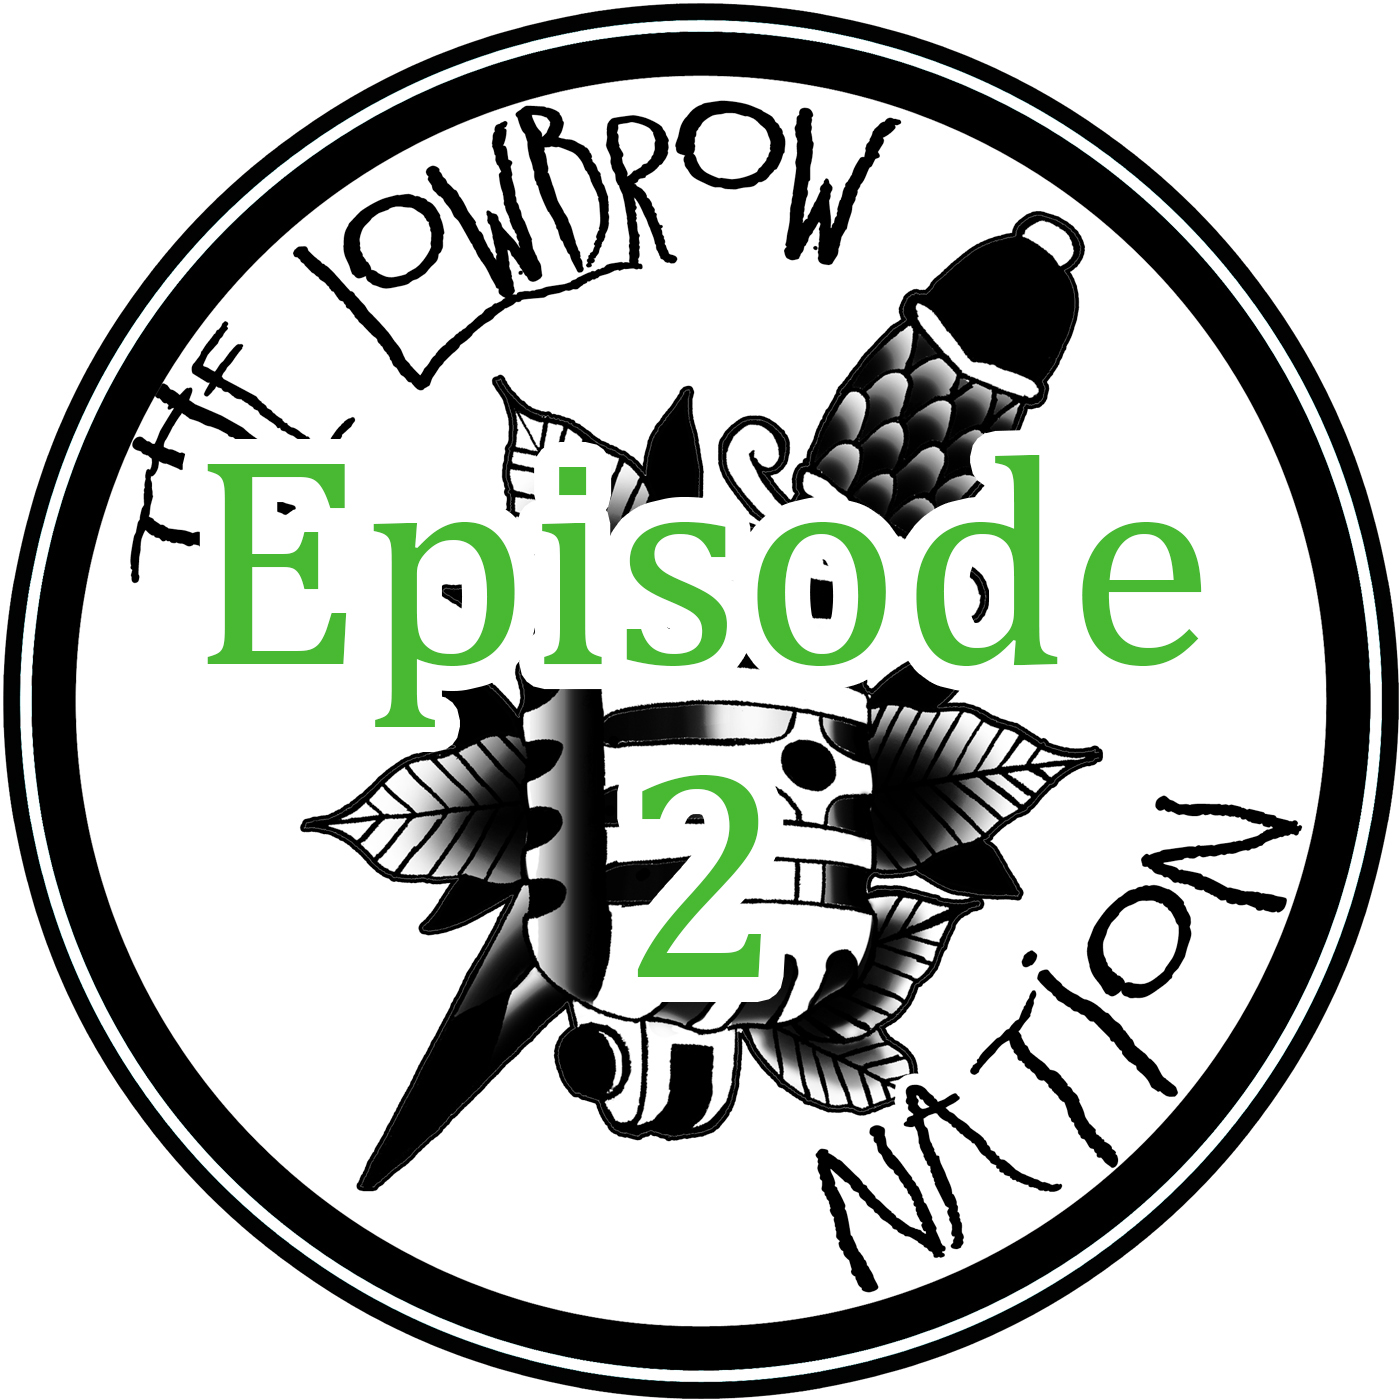 Ep 2 - The Lowbrow Hoedown